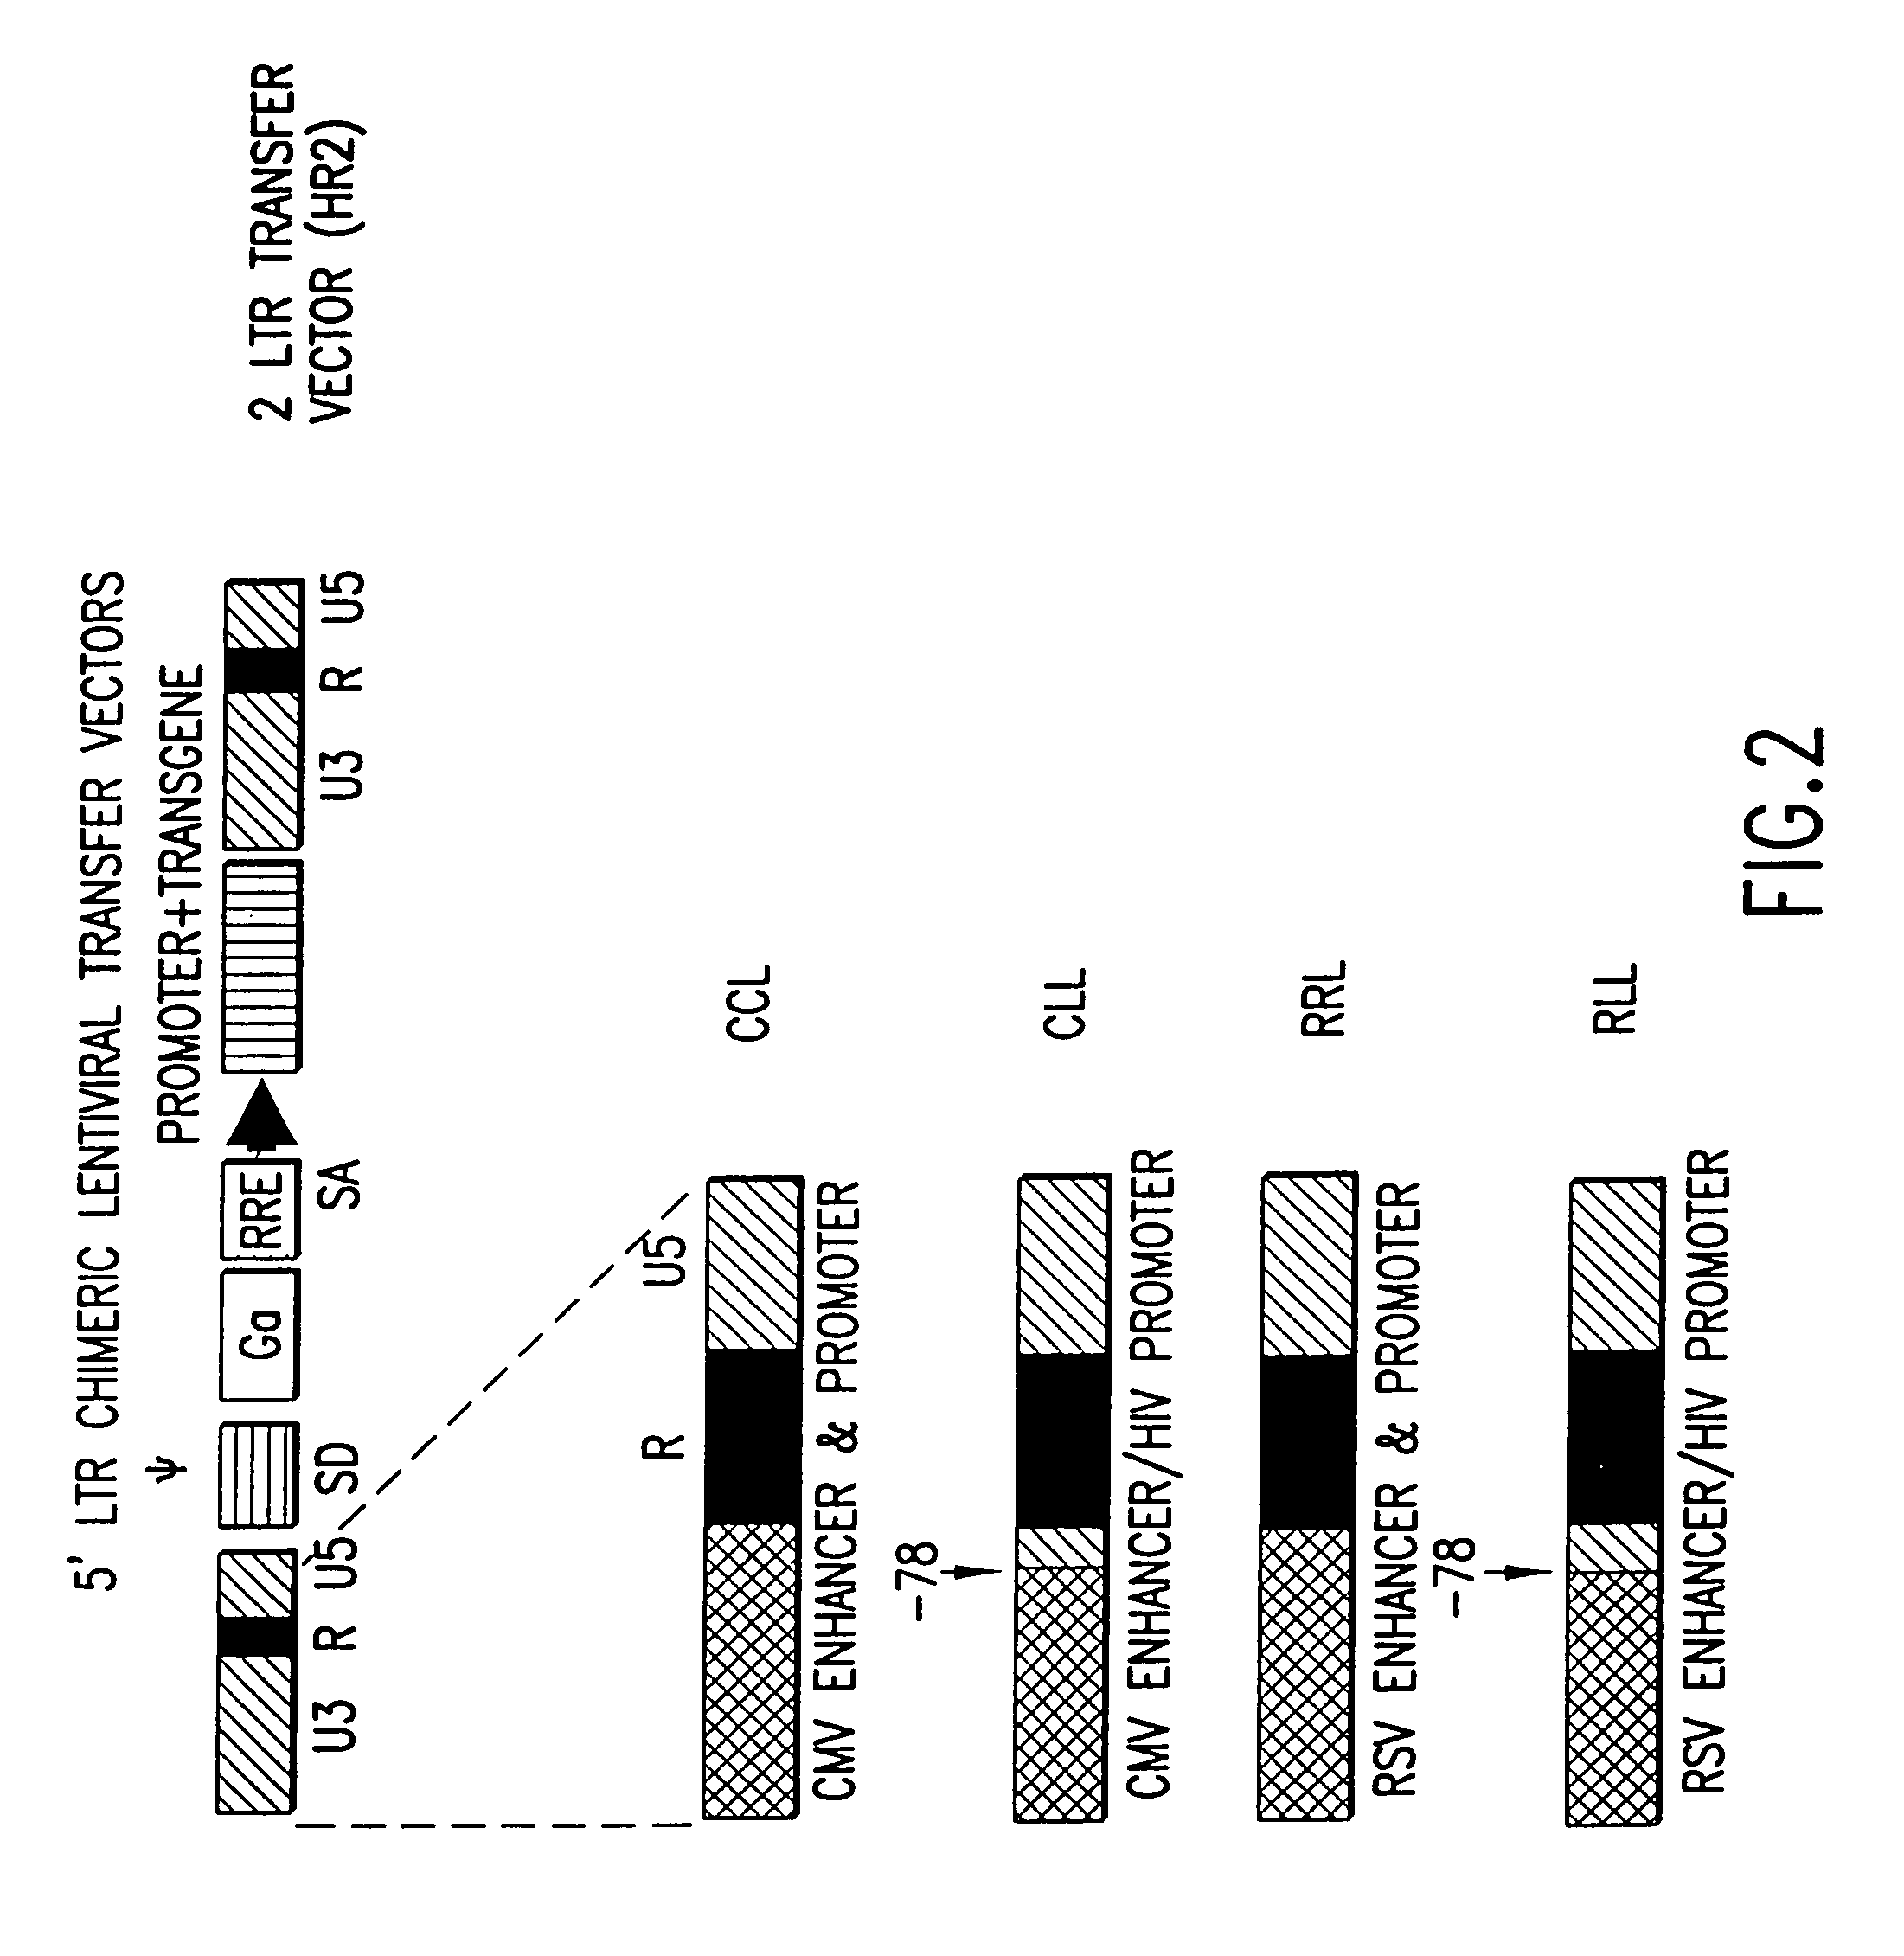 Method and means for producing high titer, safe, recombinant lentivirus vectors